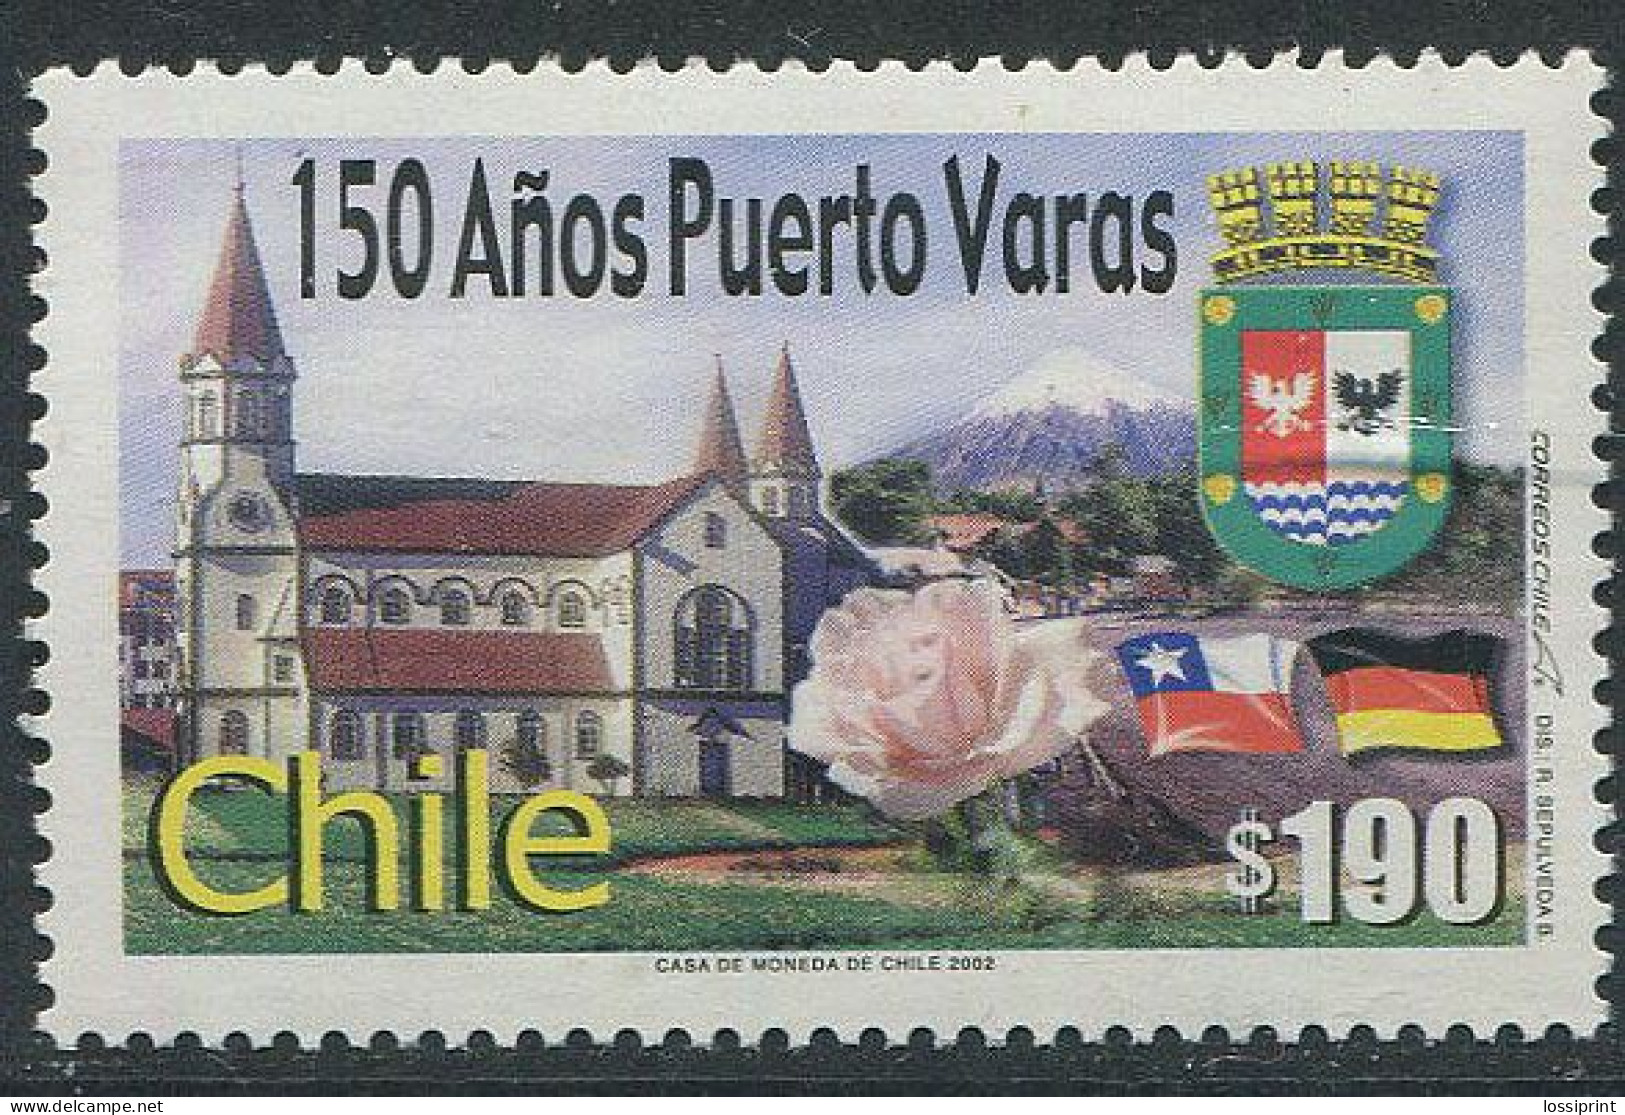 Chile:Unused Stamp 150 Years Puerto Varas, Rose, Coat Of Arm, 2002, MNH - Roses